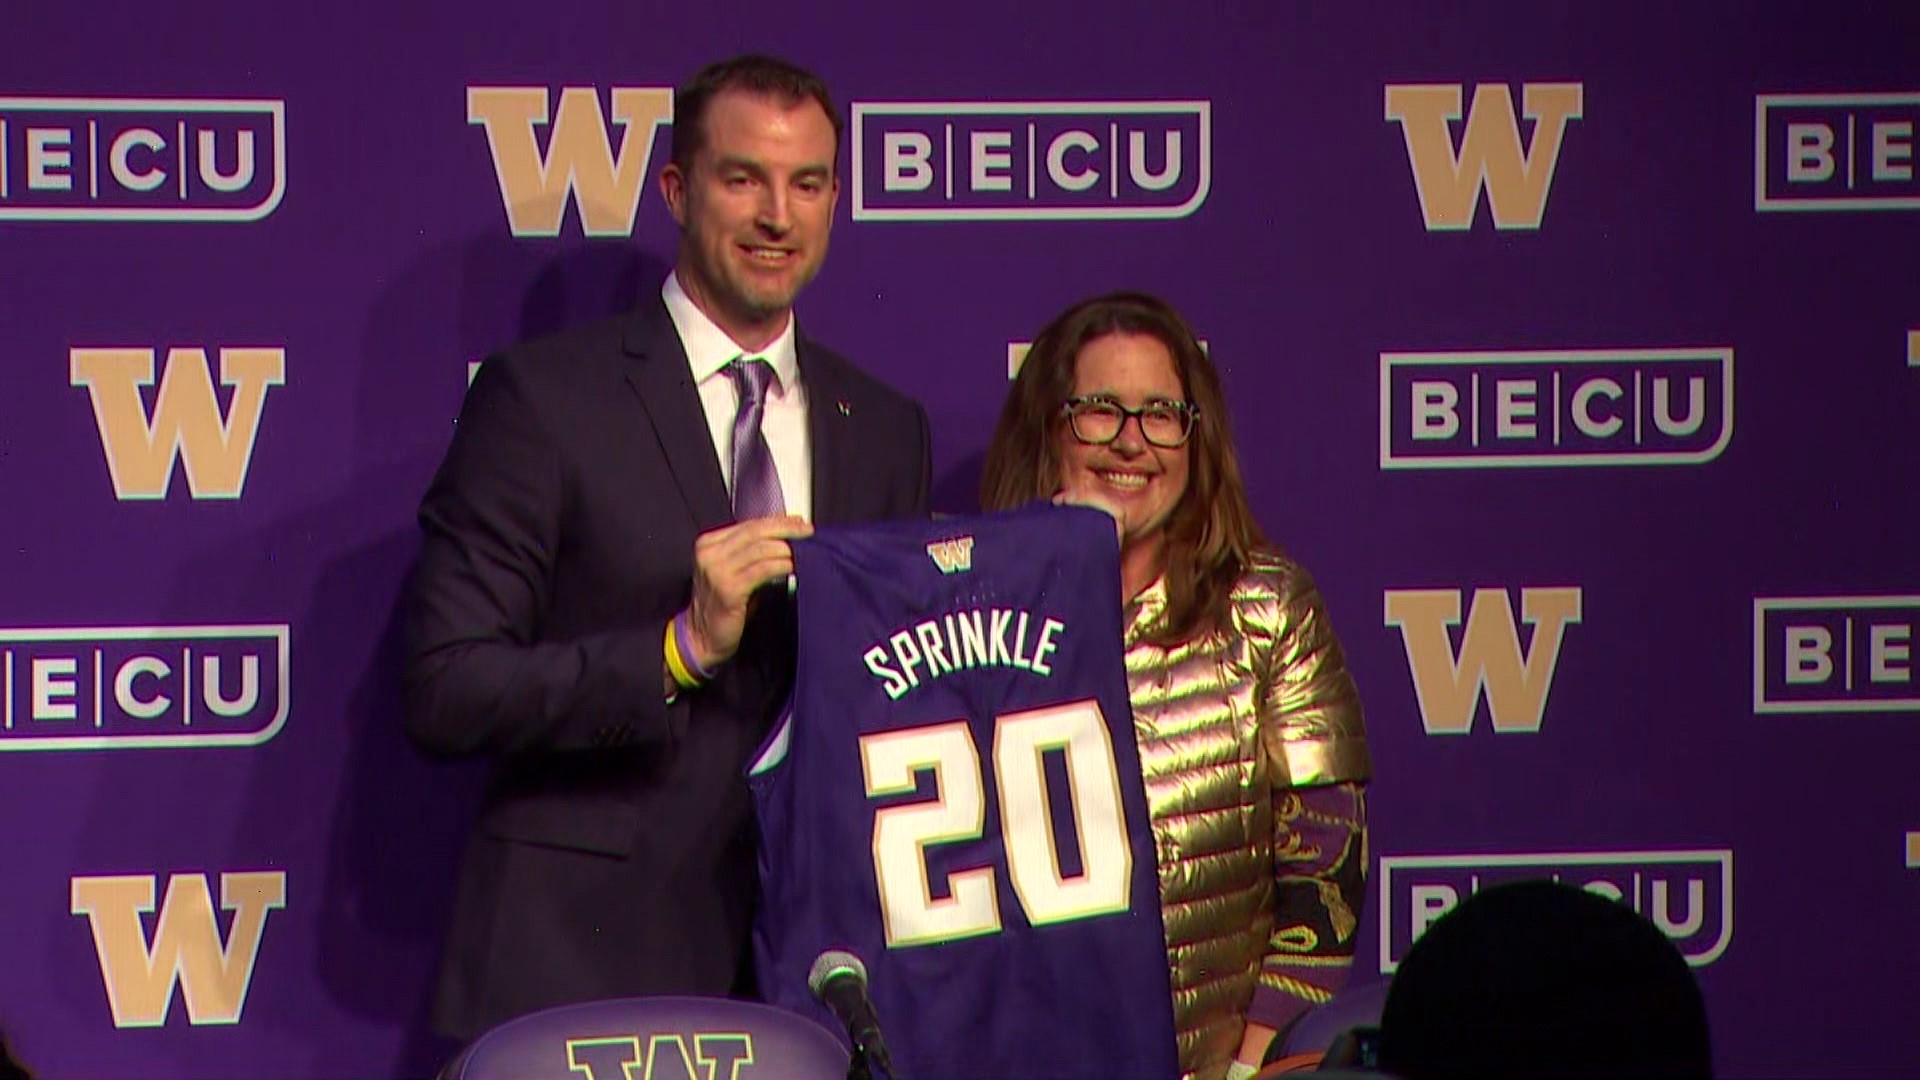 The Washington Huskies' new basketball coach spoke with reporters after leaving Utah State to replace Mike Hopkins.